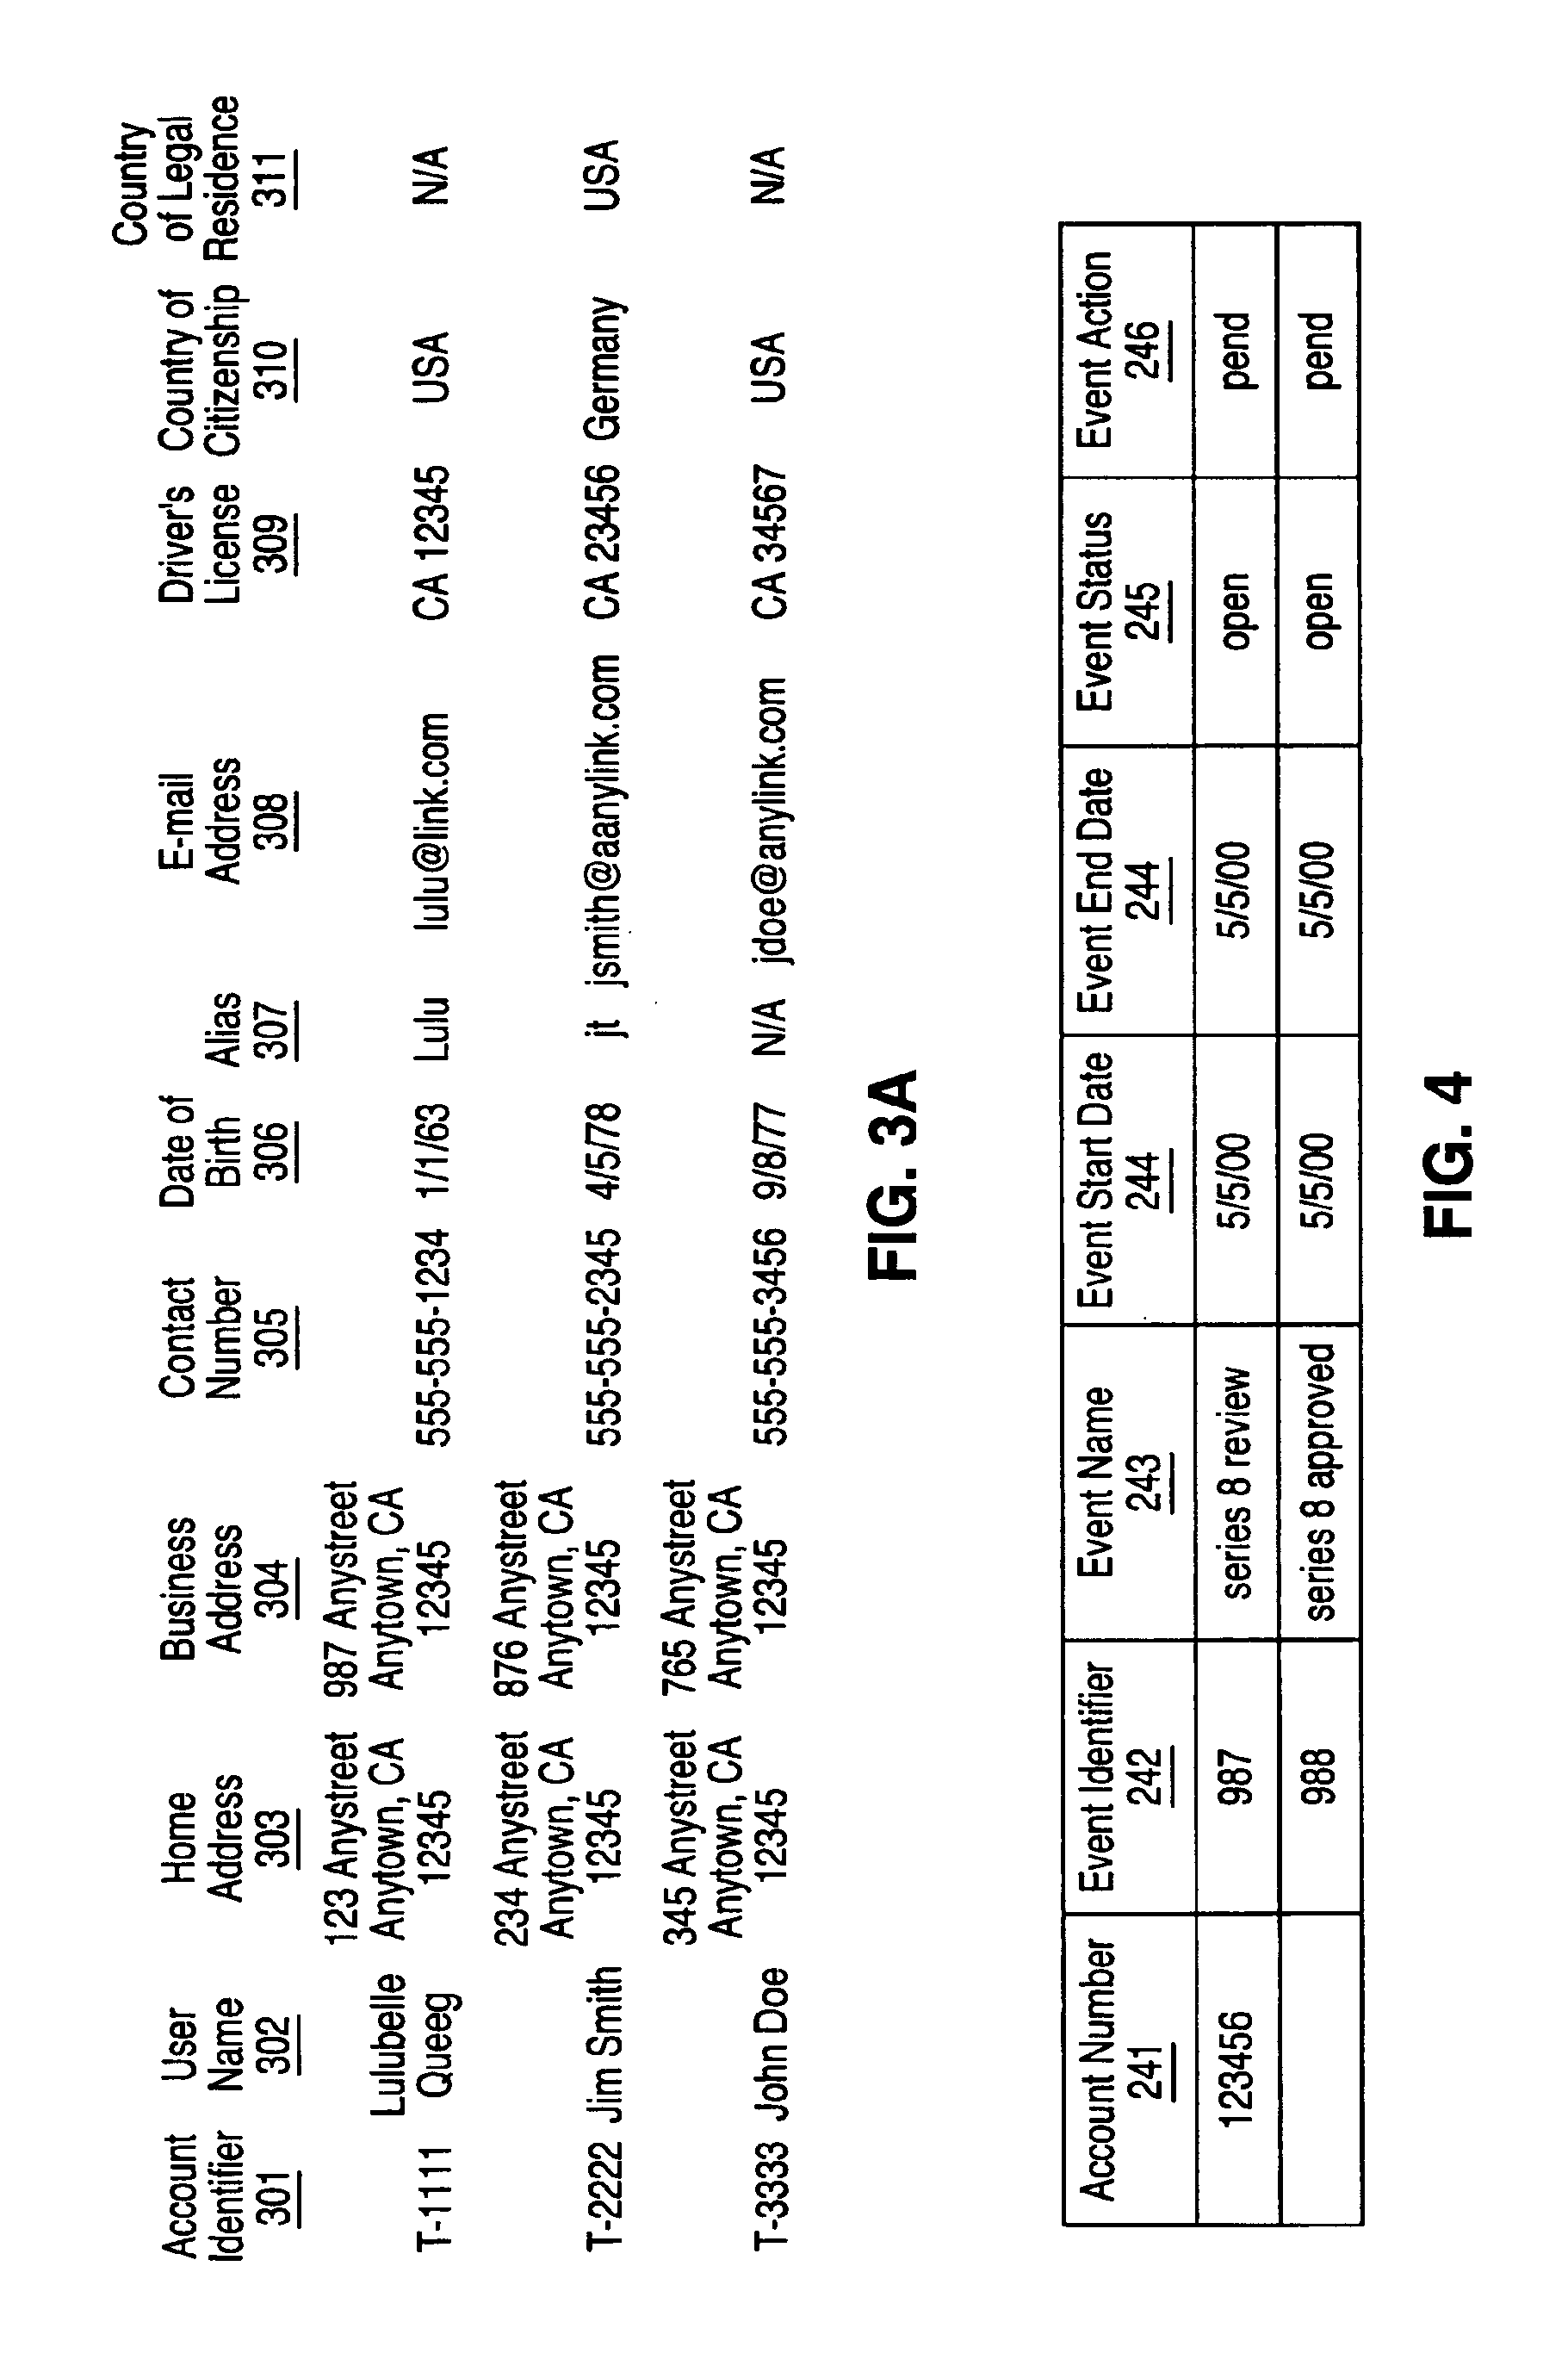 Method and apparatus for new accounts program